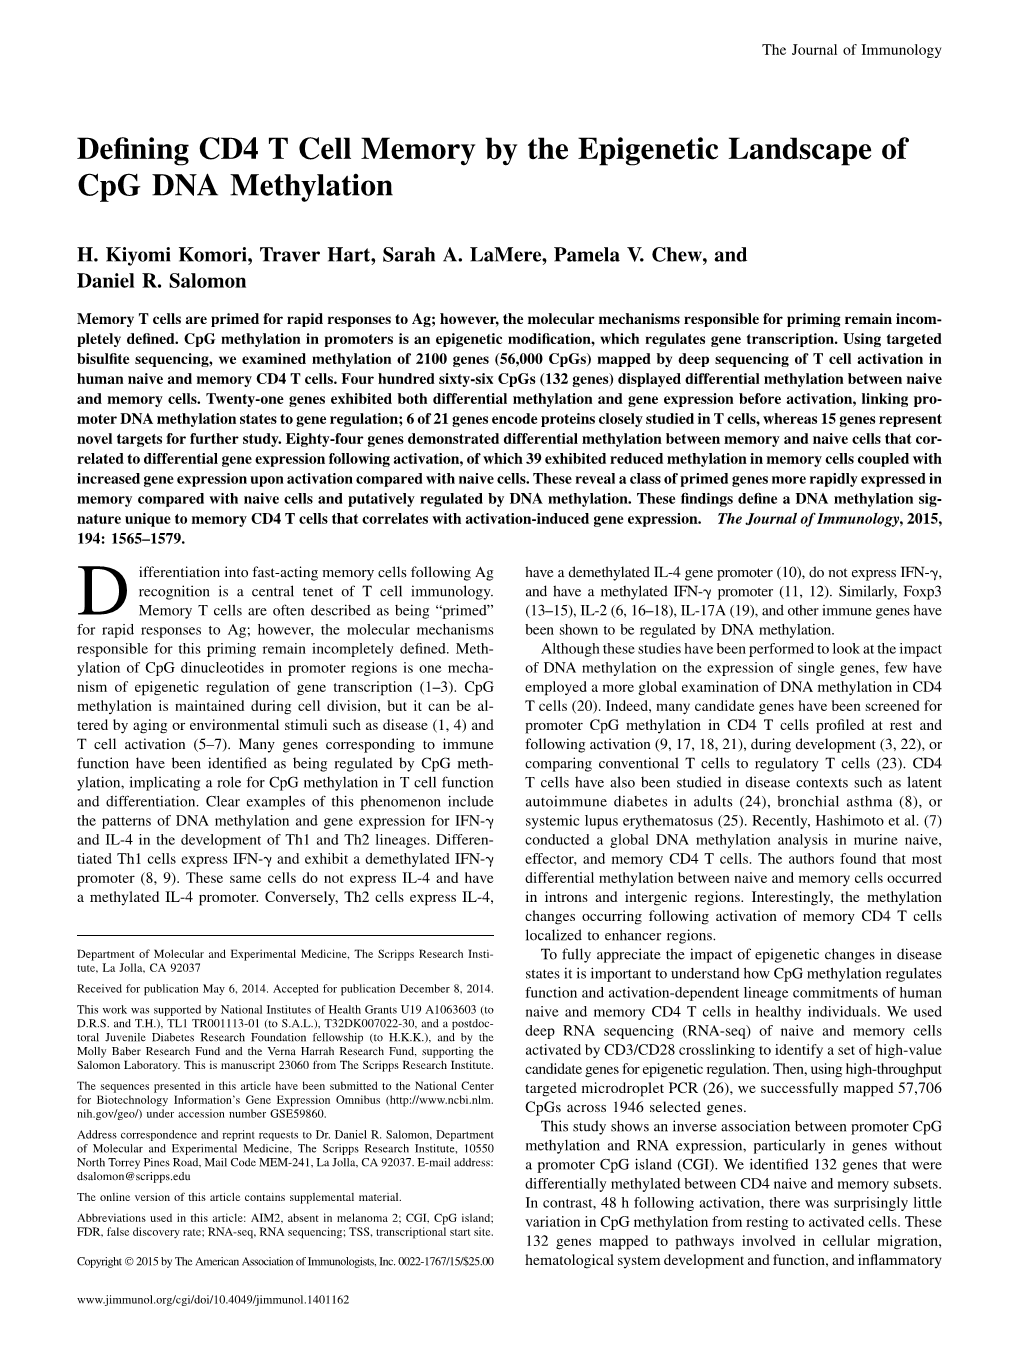 Methylation Epigenetic Landscape of Cpg DNA Defining CD4 T Cell Memory By